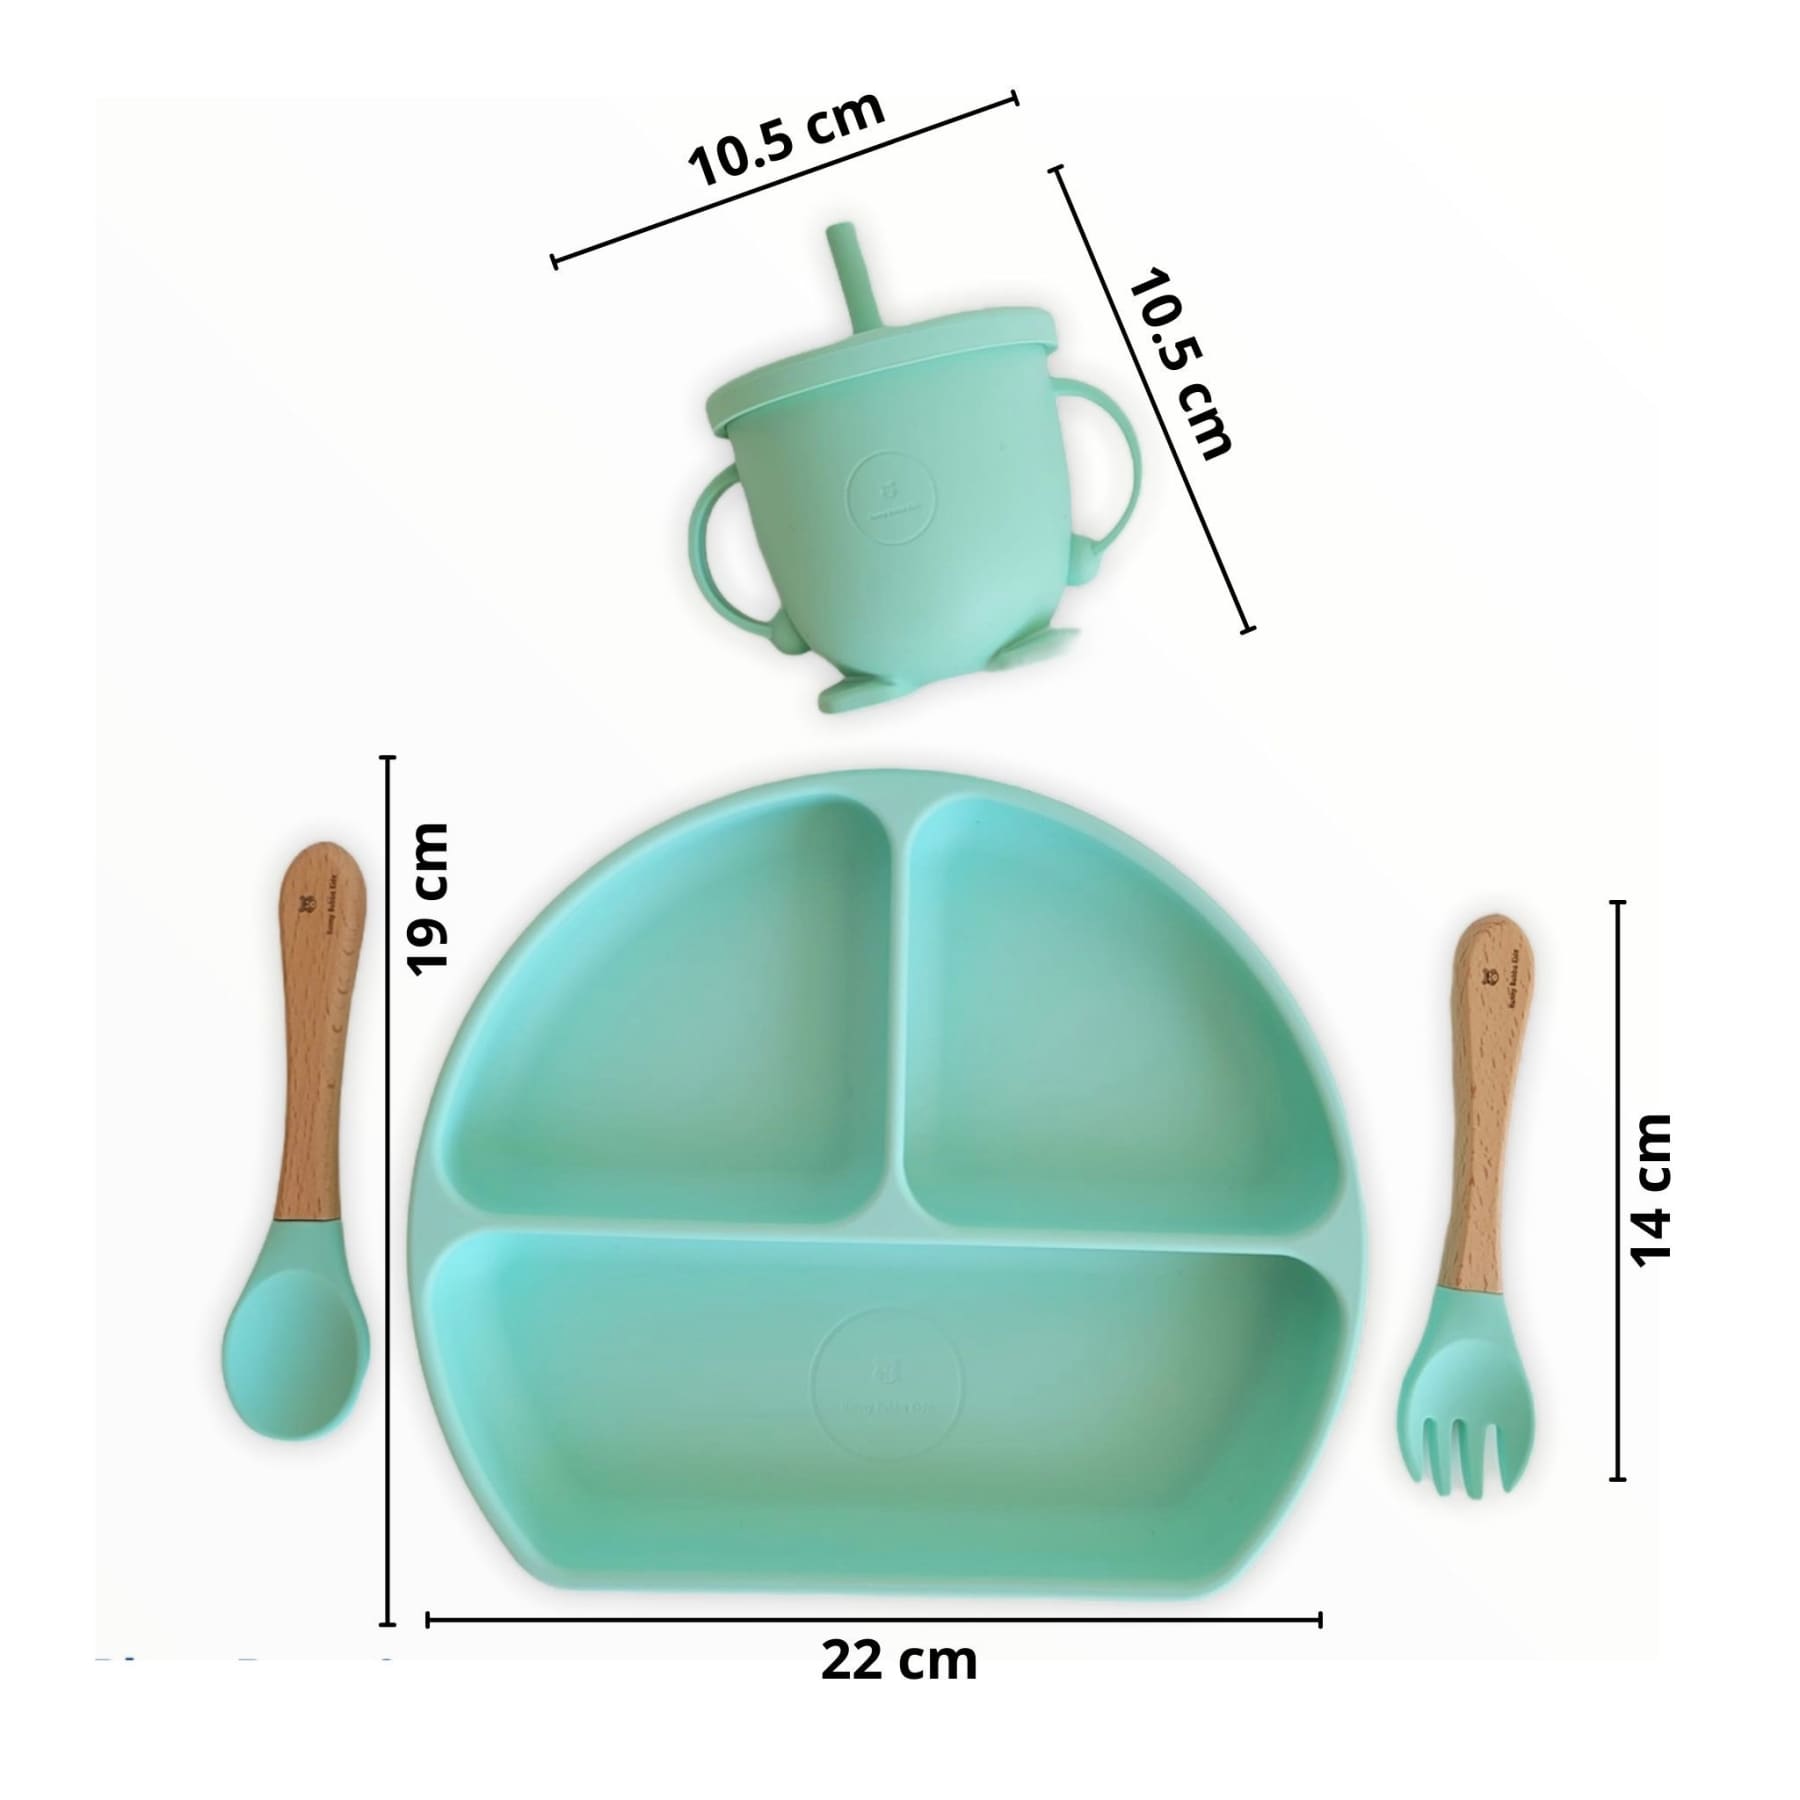 cute baby four piece dining set with plate, cup, sppon and fork. Green mint set | Hunny Bubba Kids